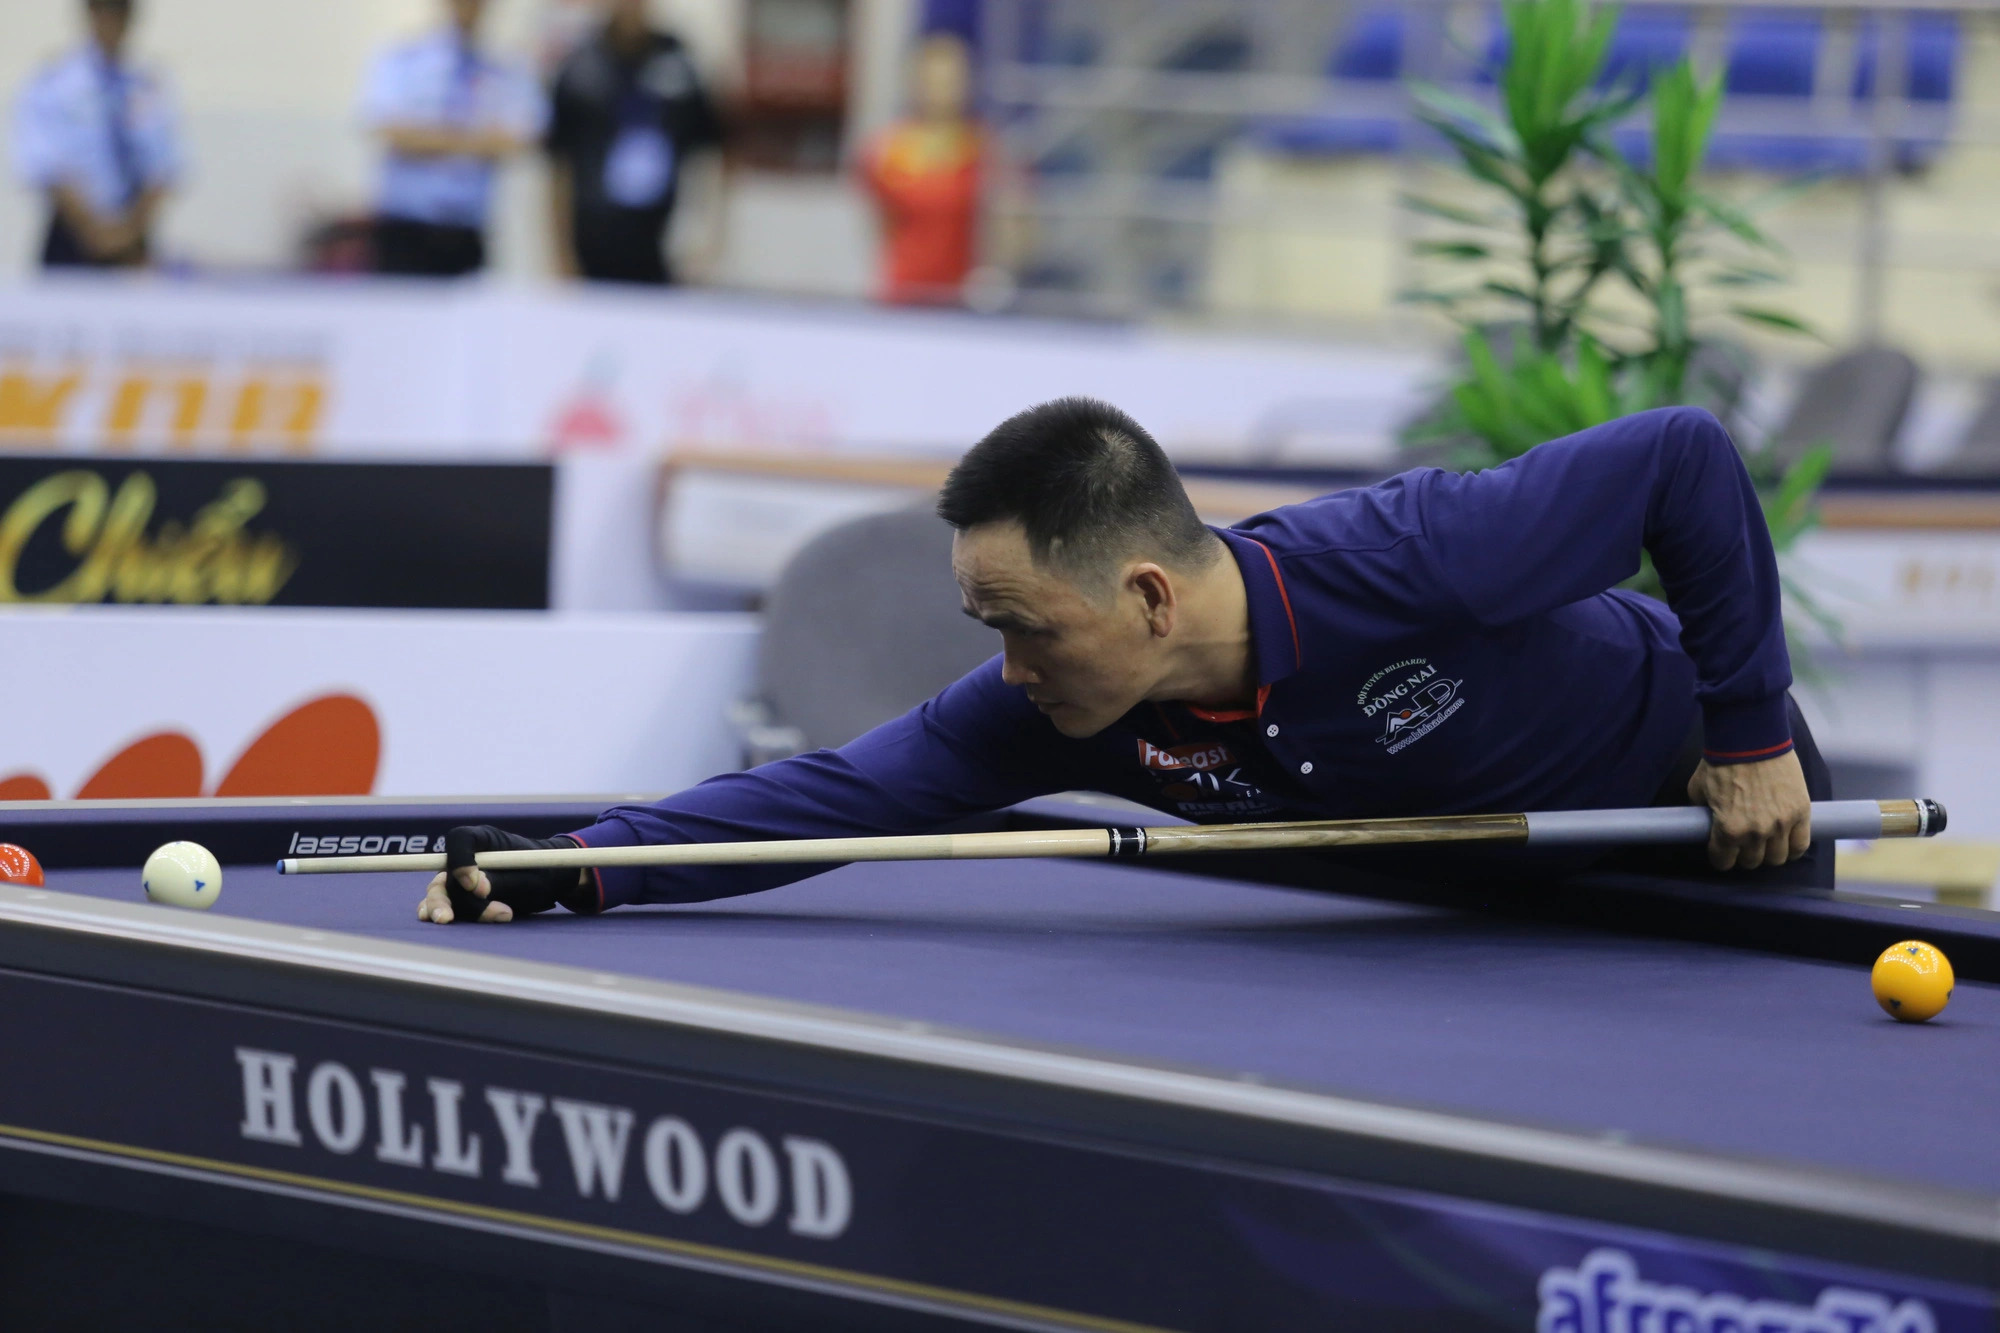 Vietnamese billiards player crowned champion of Ho Chi Minh City World Cup 3-Cushion